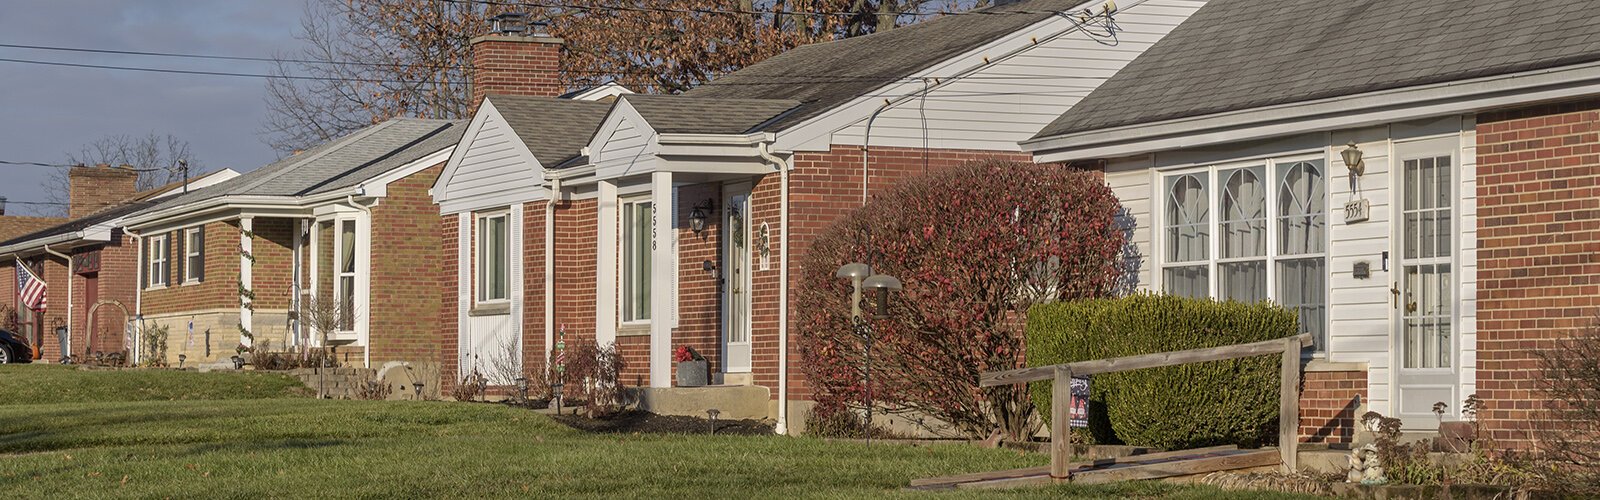 Most of Mt. Airy’s homes were constructed between the 1940s and 1960s.They’re the type of homes that are approachable for young professionals and families.